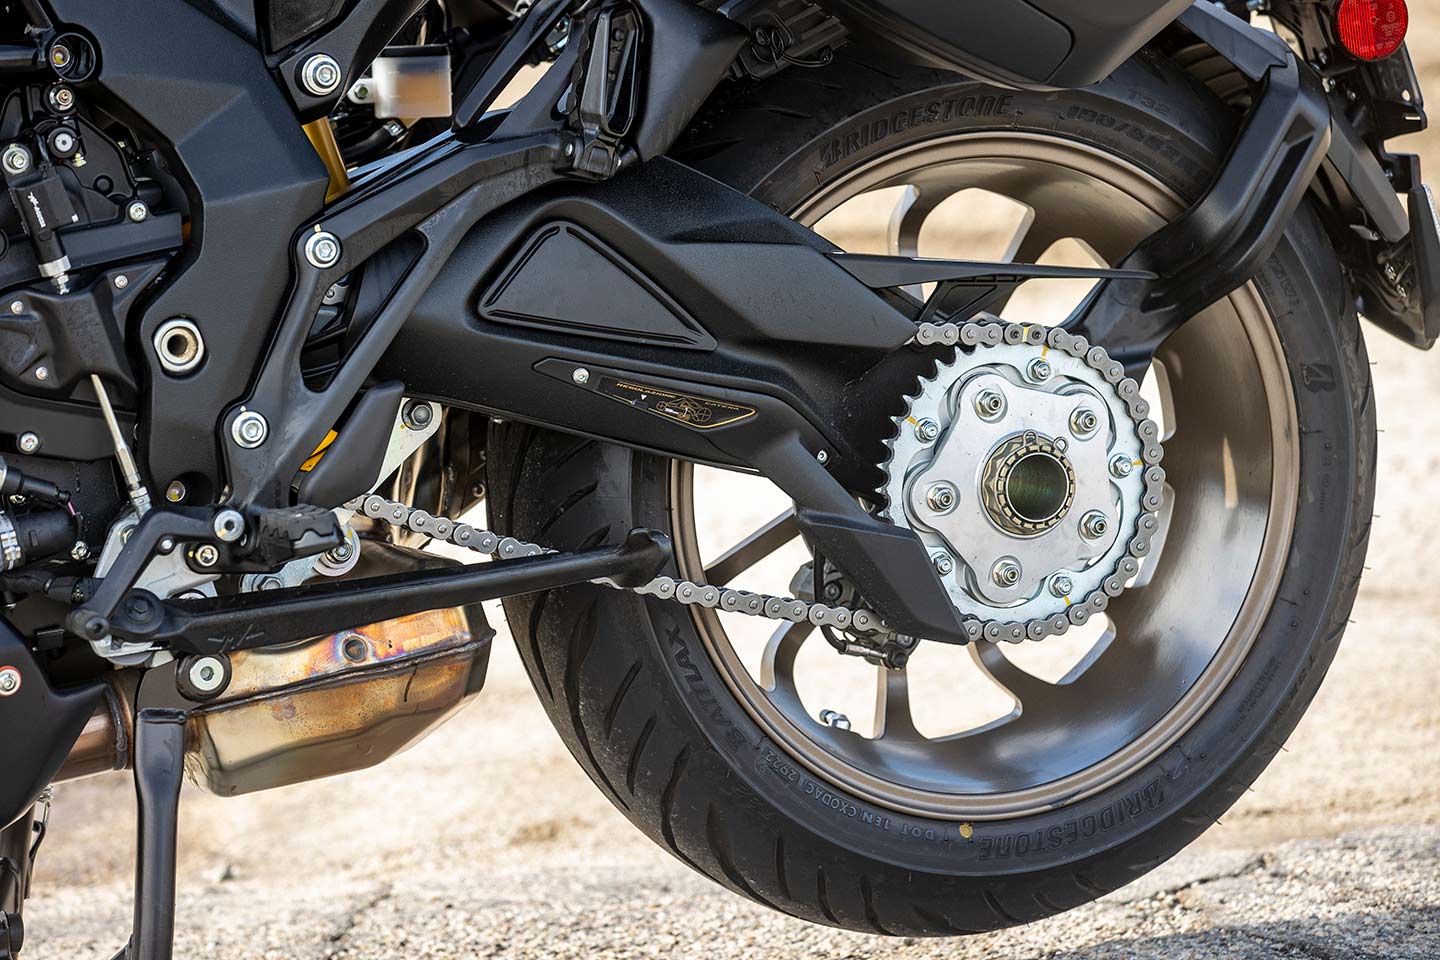 The business end of the Turismo Veloce’s single-sided swingarm.